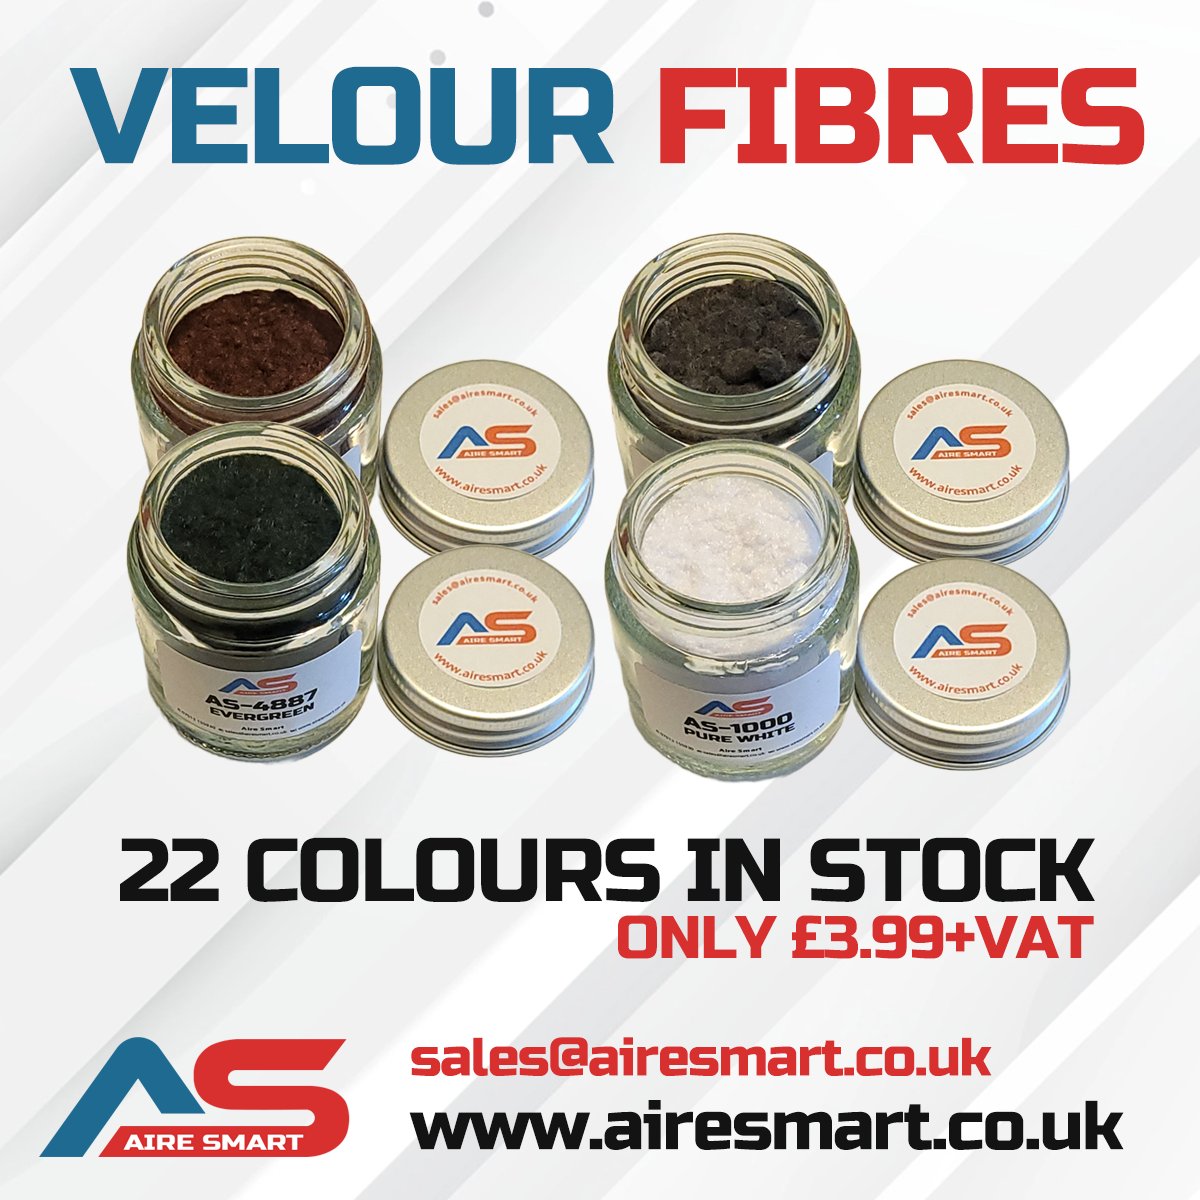 Looking for VELOUR FIBRES? Then look no further, we have 22 colours fully in stock ready to despatch!
📱 07513 155930
📧 sales@airesmart.co.uk
🌐 airesmart.co.uk
#velourrepair #velourfibre #velourcolours #flockfibre #upholsteryrepair #interiortrim #airesmart #smartrepairs